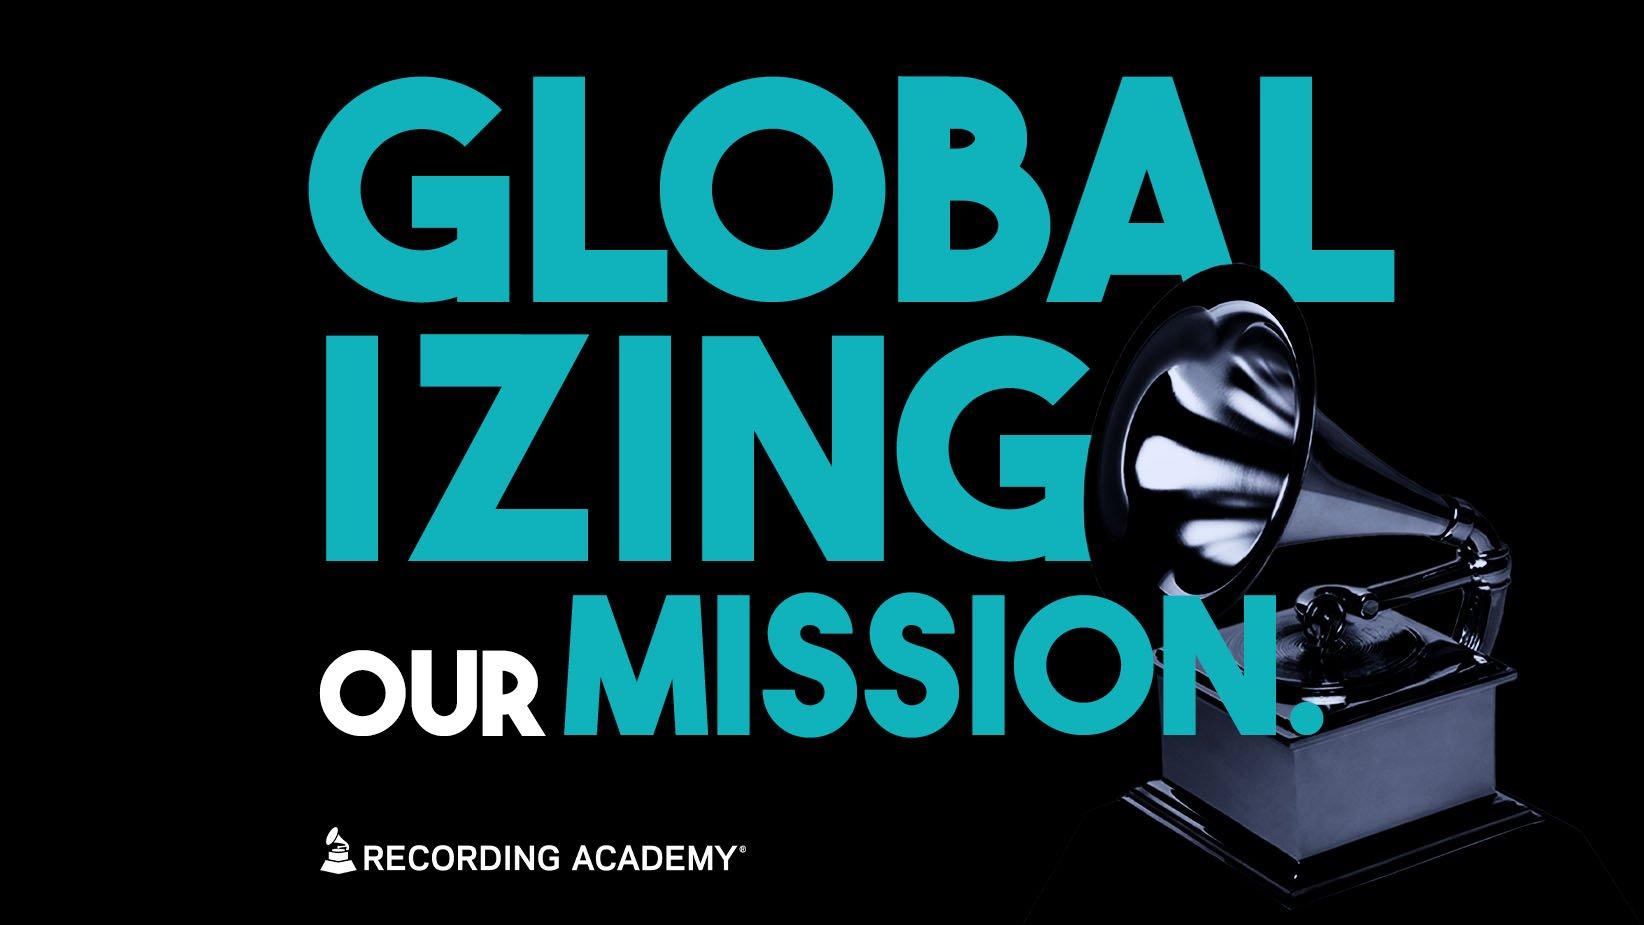 A graphic announcing the Recording Academy's global expansion into Africa and the Middle East. The words "Globalizing Our Mission" are written in blue and white letters on a black background featuring the Recording Academy logo and a GRAMMY Award statue.